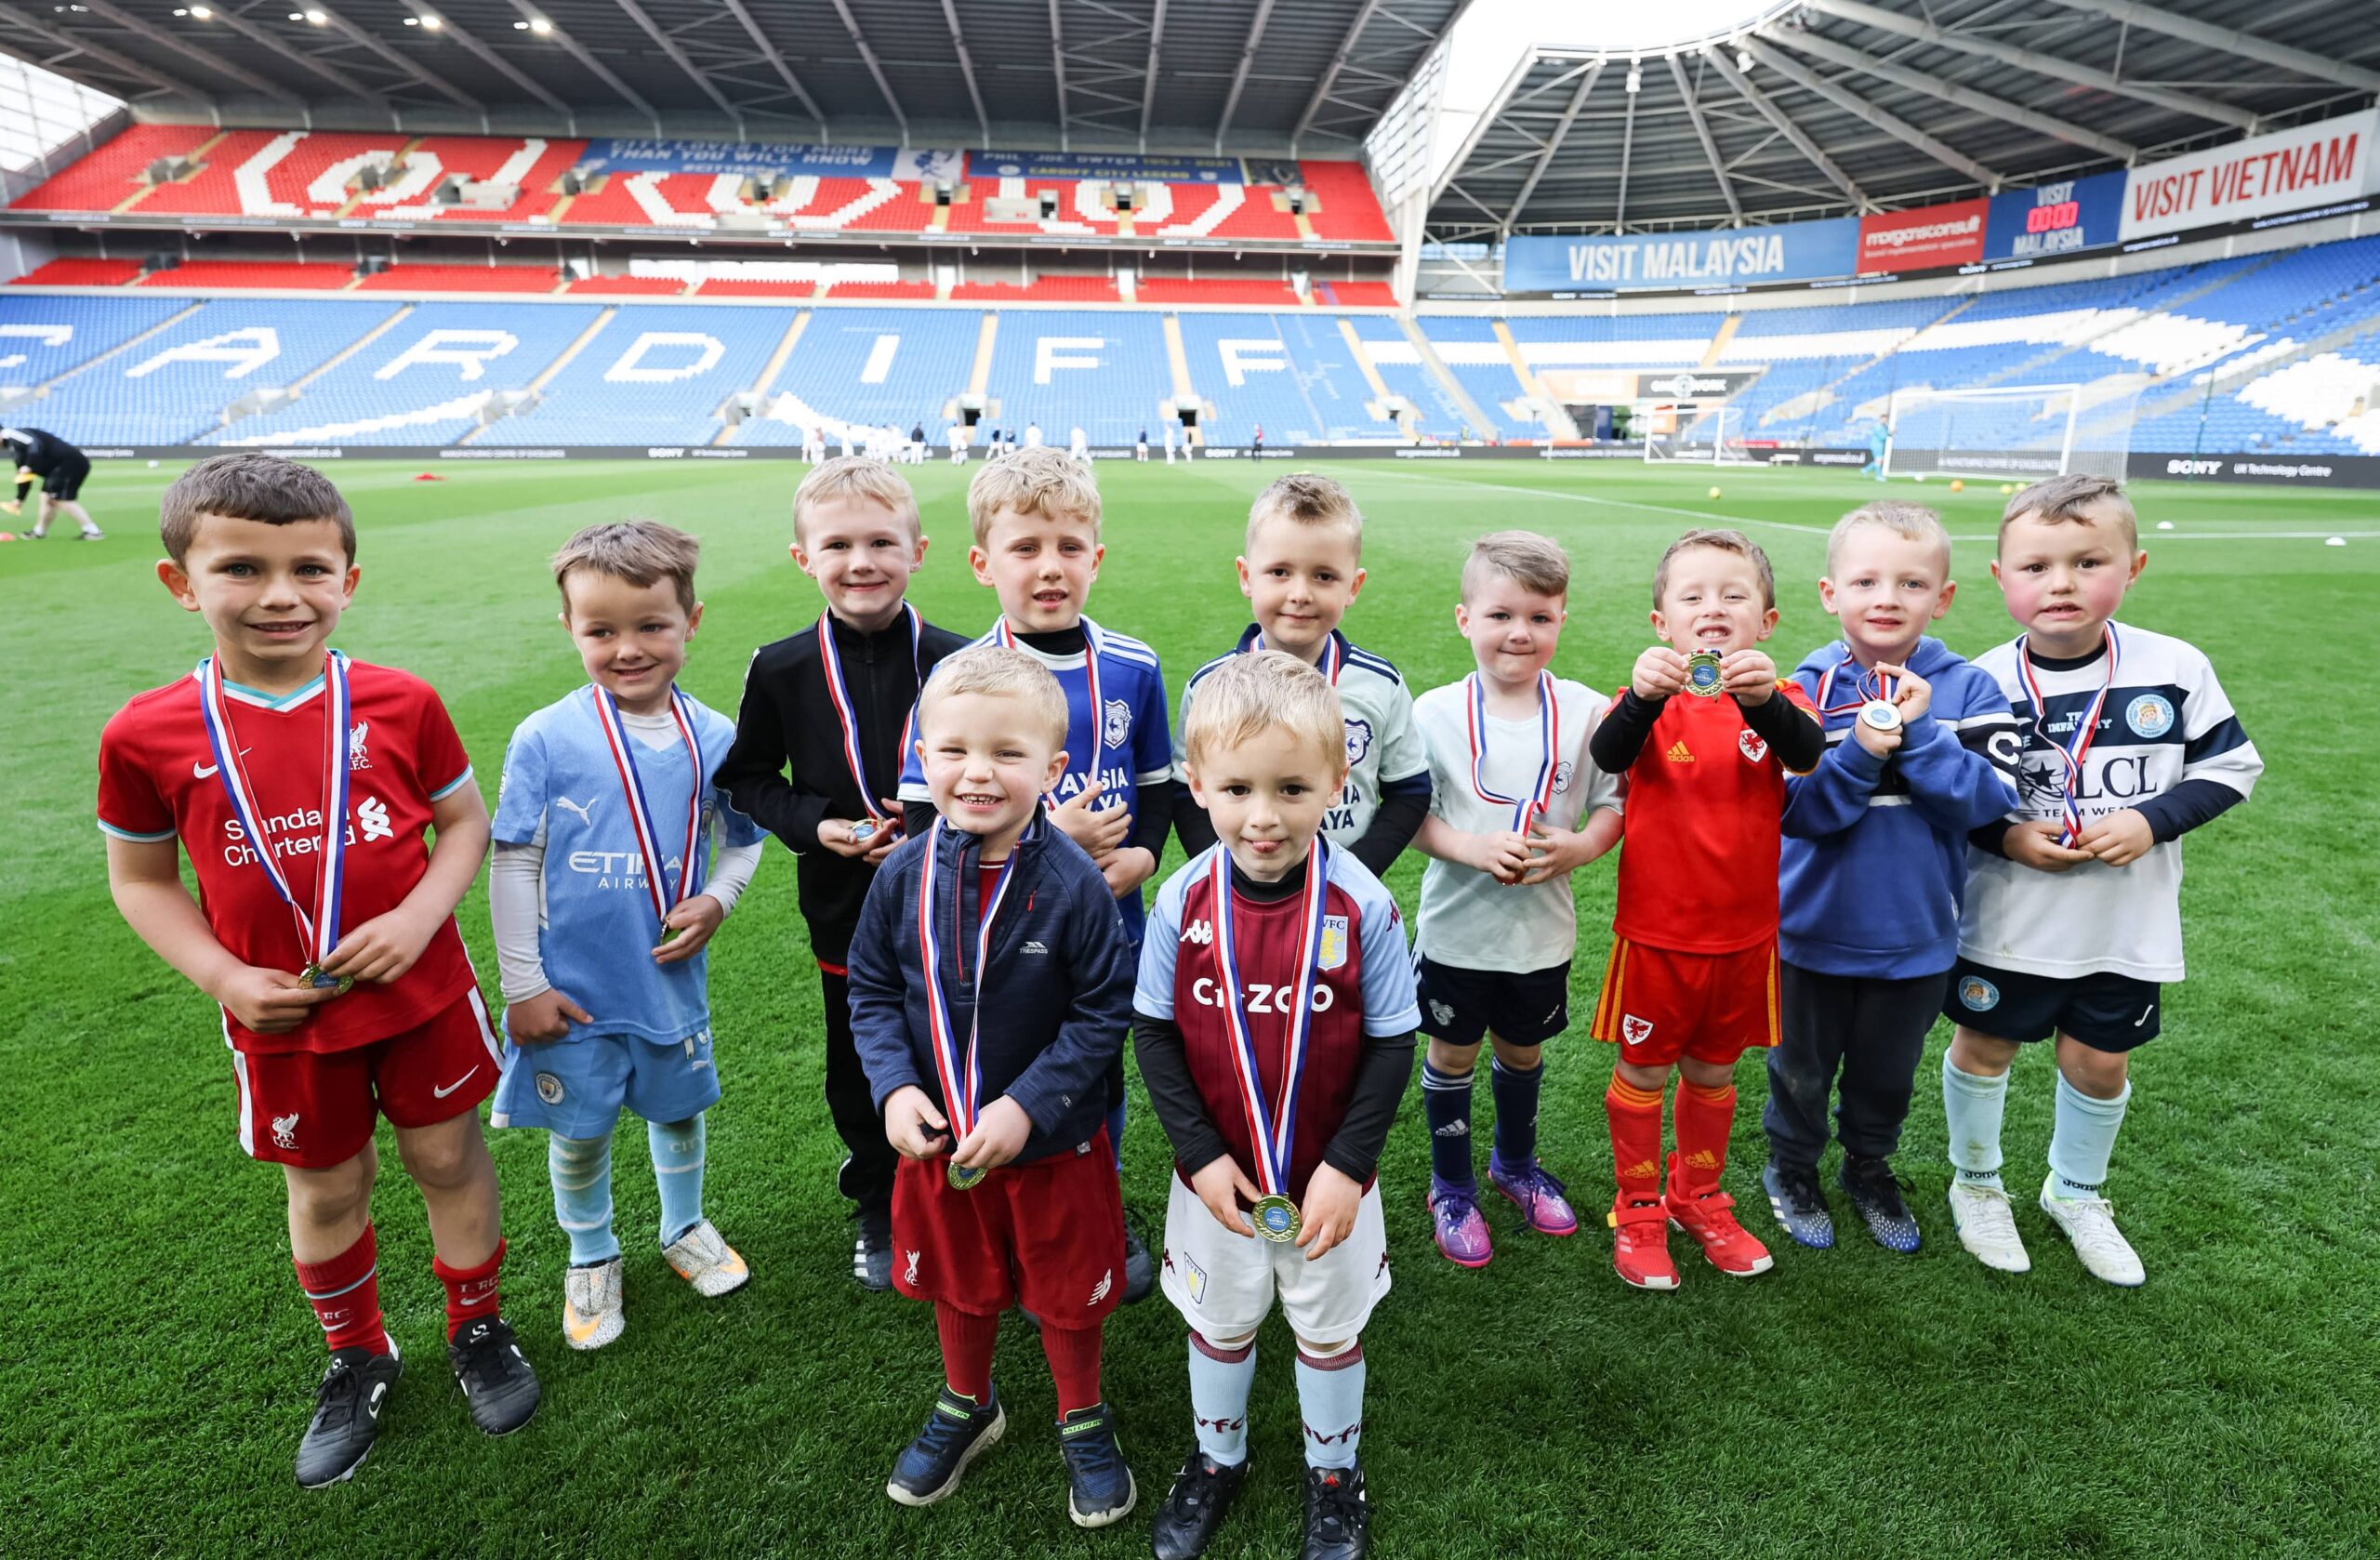 A photo of a small group of children standing on the pitch of Cardiff City Football Club Stadium wearing medals for participating in a Sony Charity Football children's game.